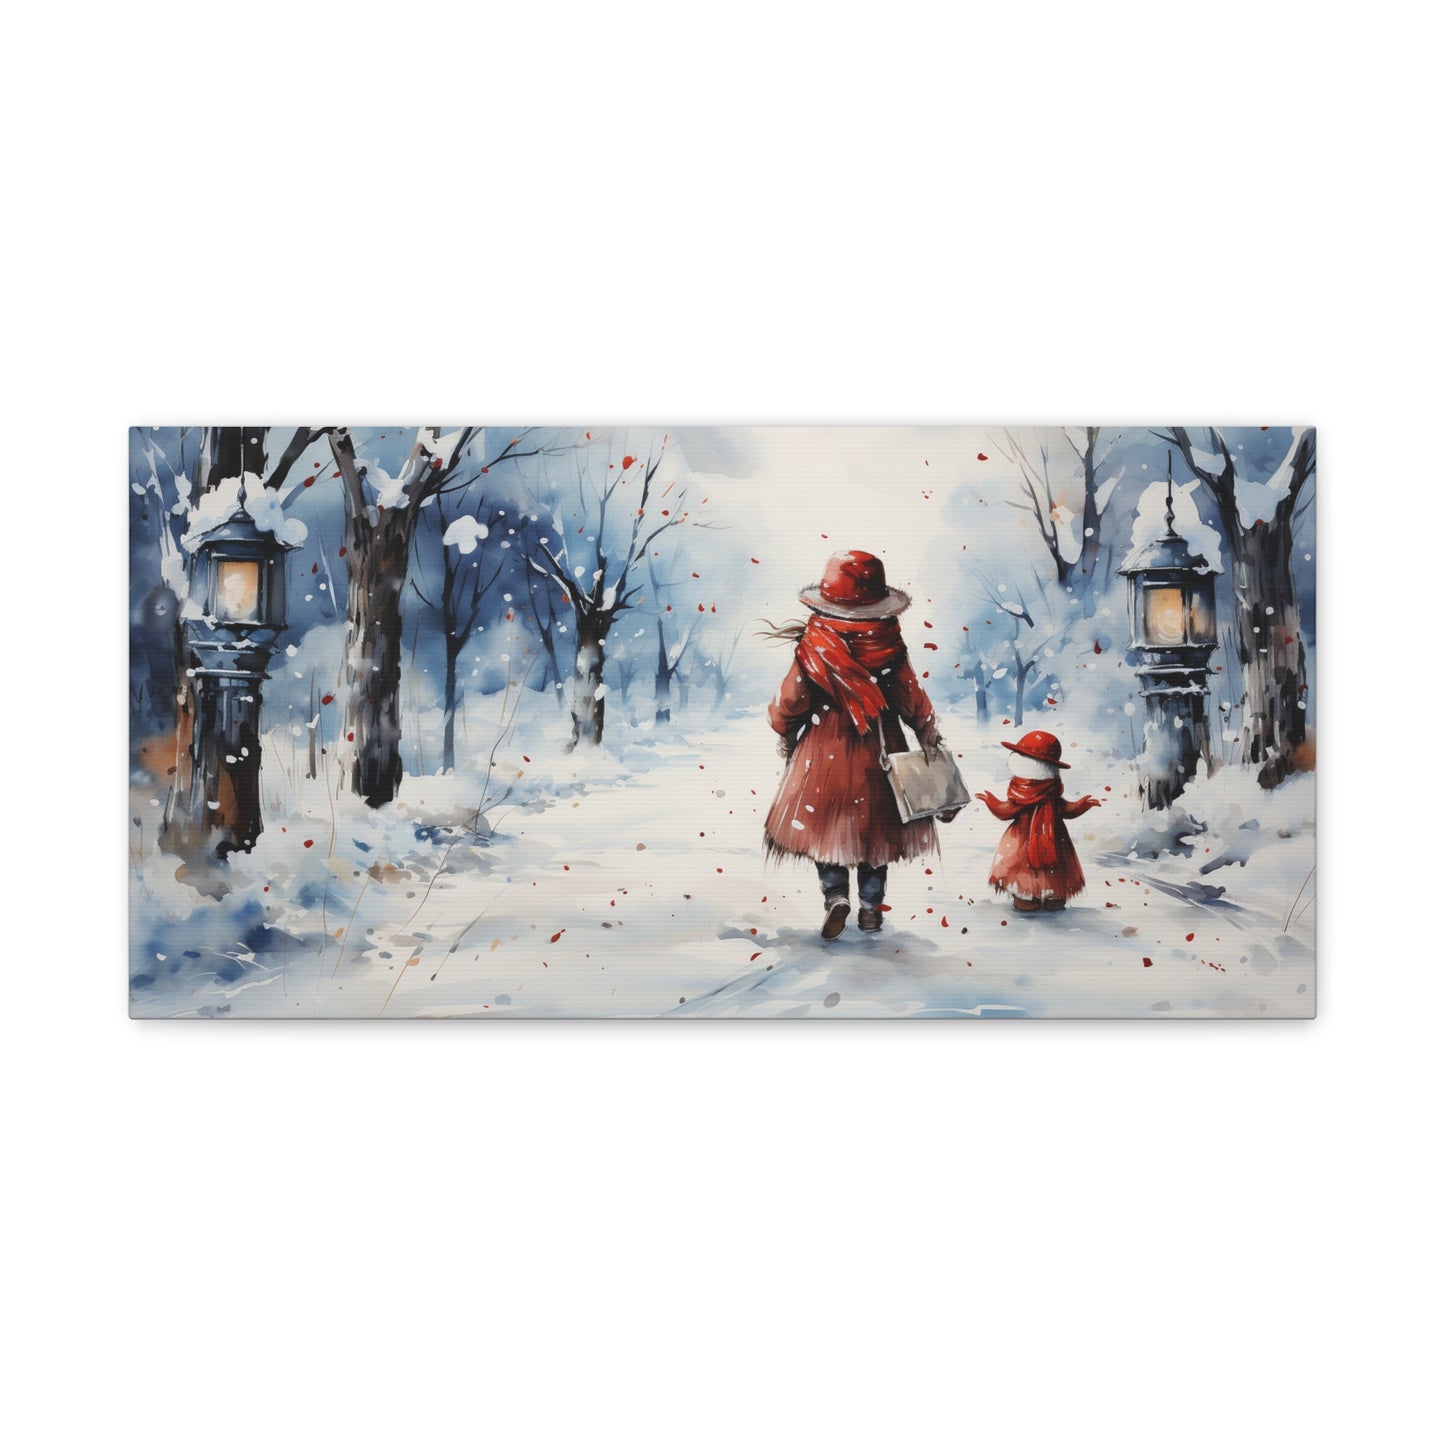 Frozen Friendship  | Frosty Friendship Collection | Holiday decor | Christmas Wall Art | Retro Art | Christmas